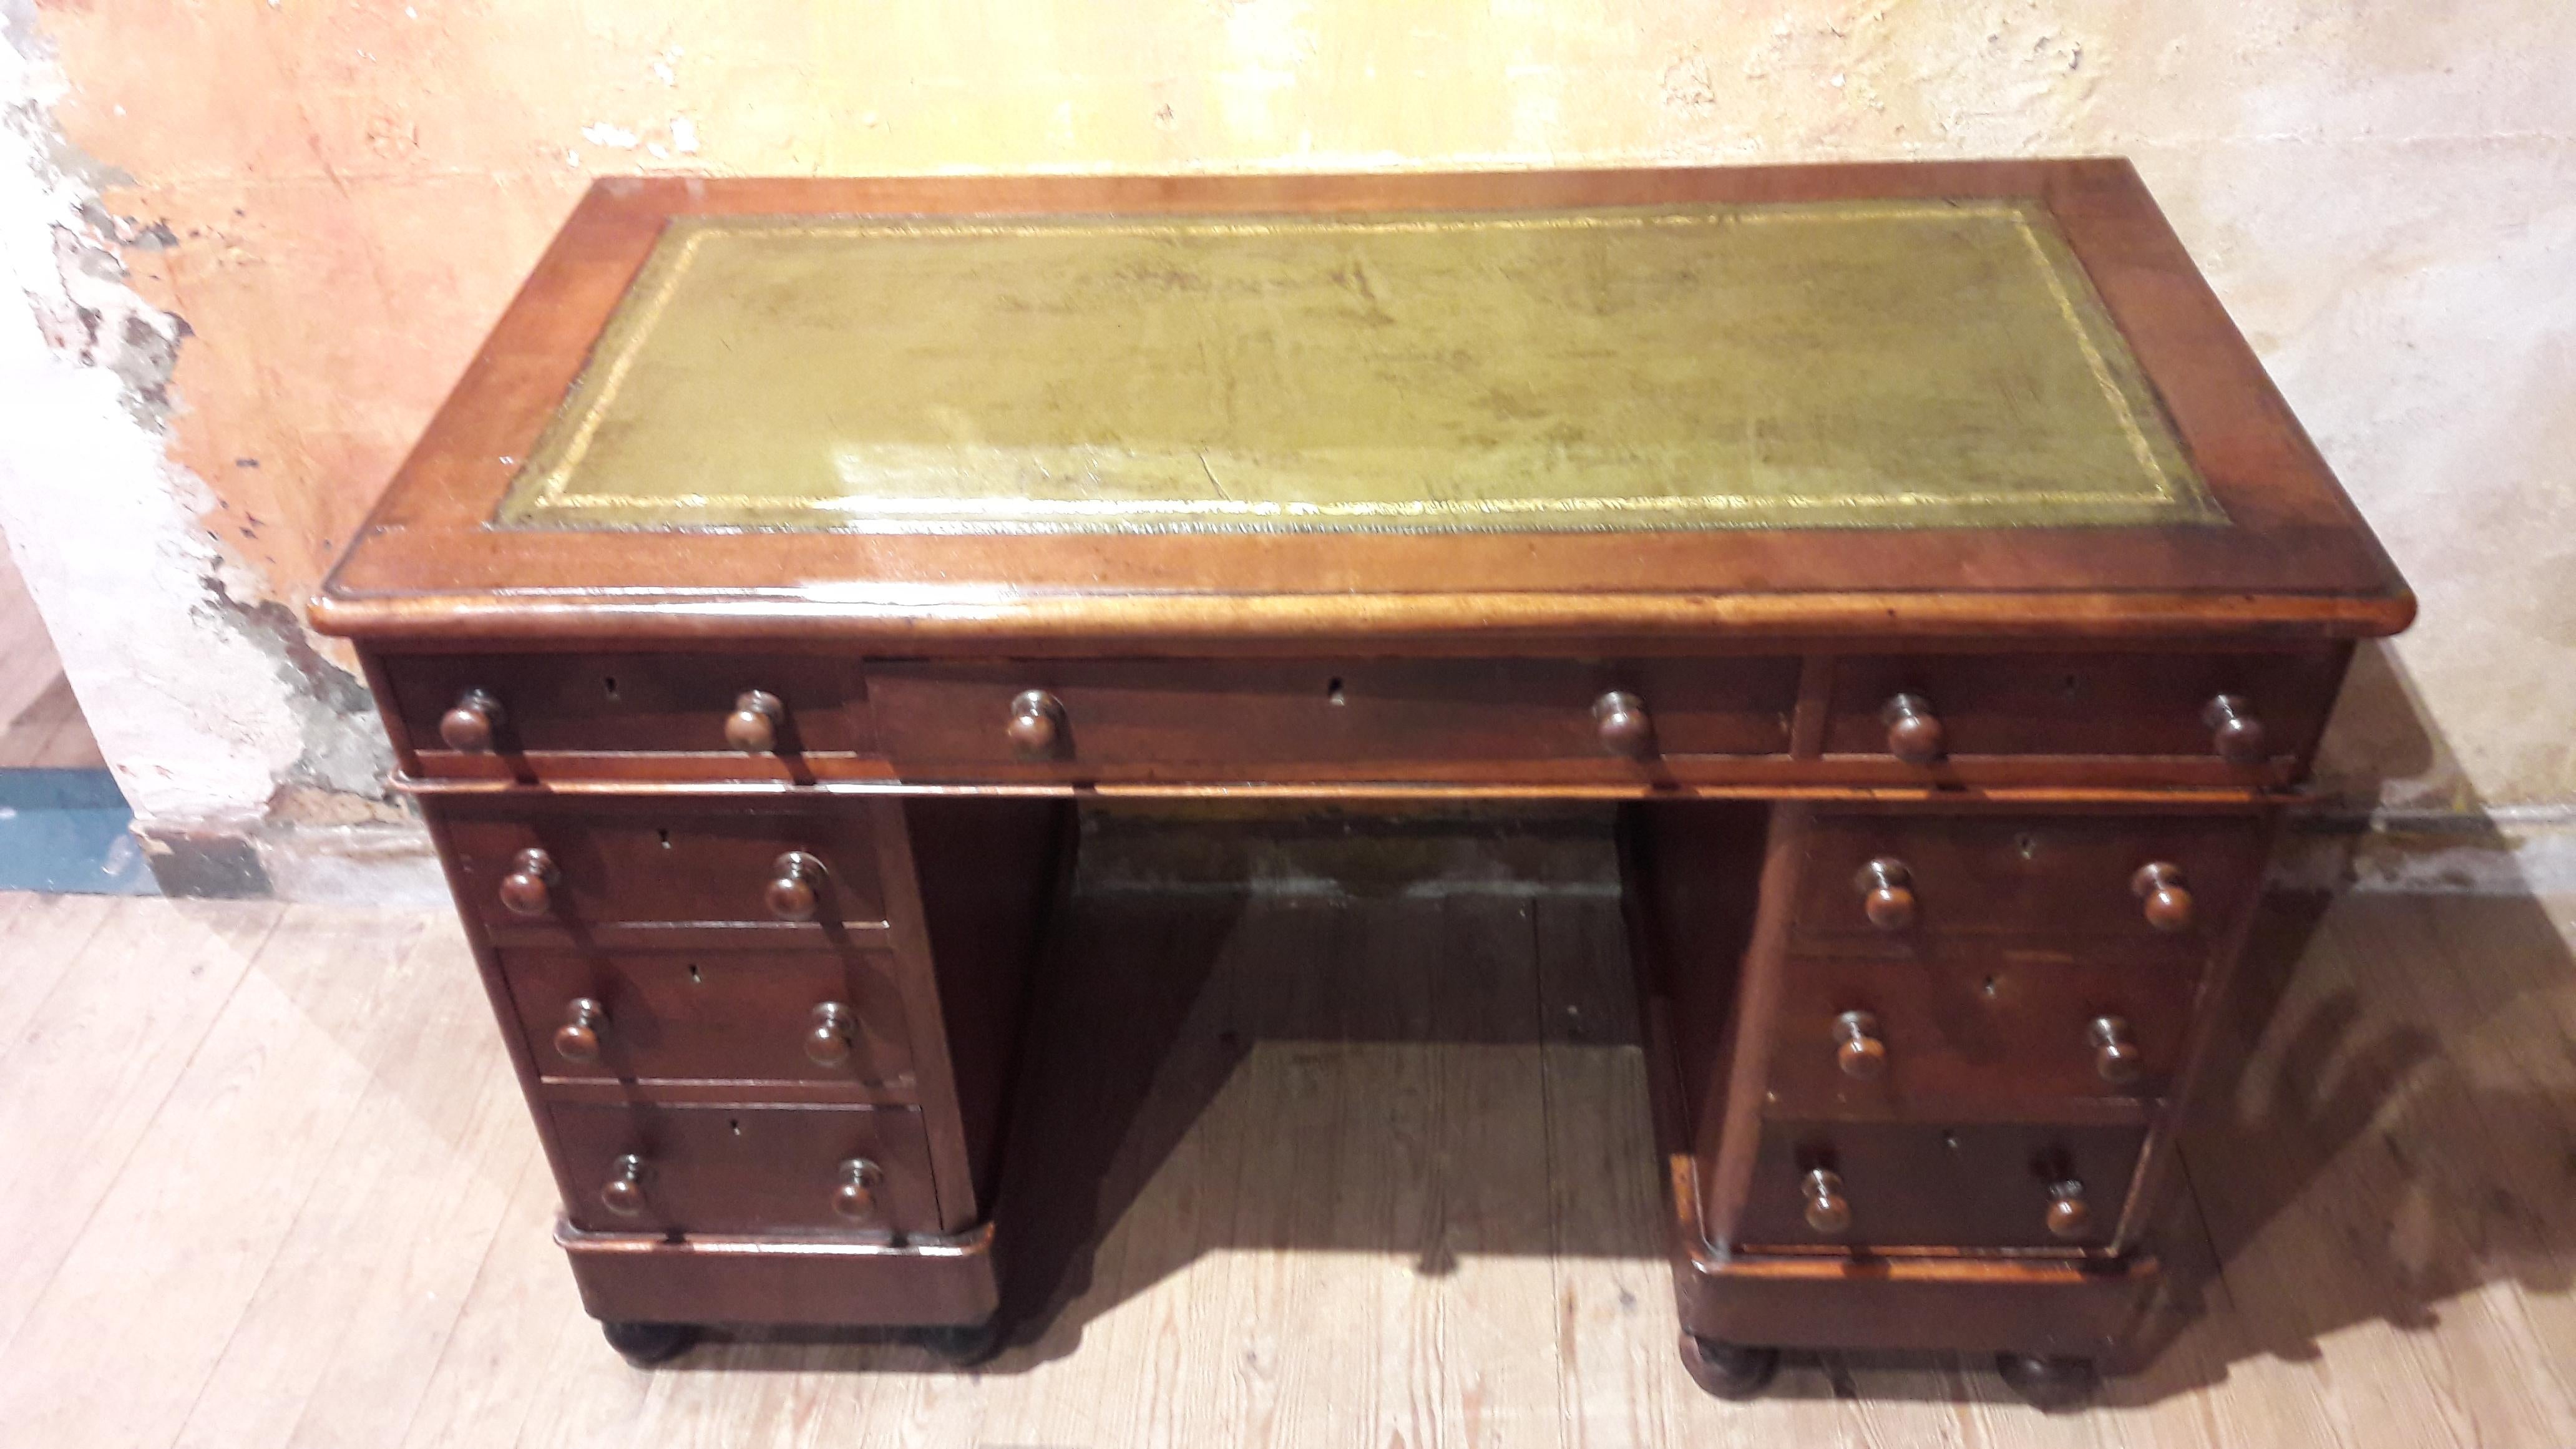 Charming late-Victorian pedestal desk with green leather (new).
The leather can be changed to an other color (with a surcharge).